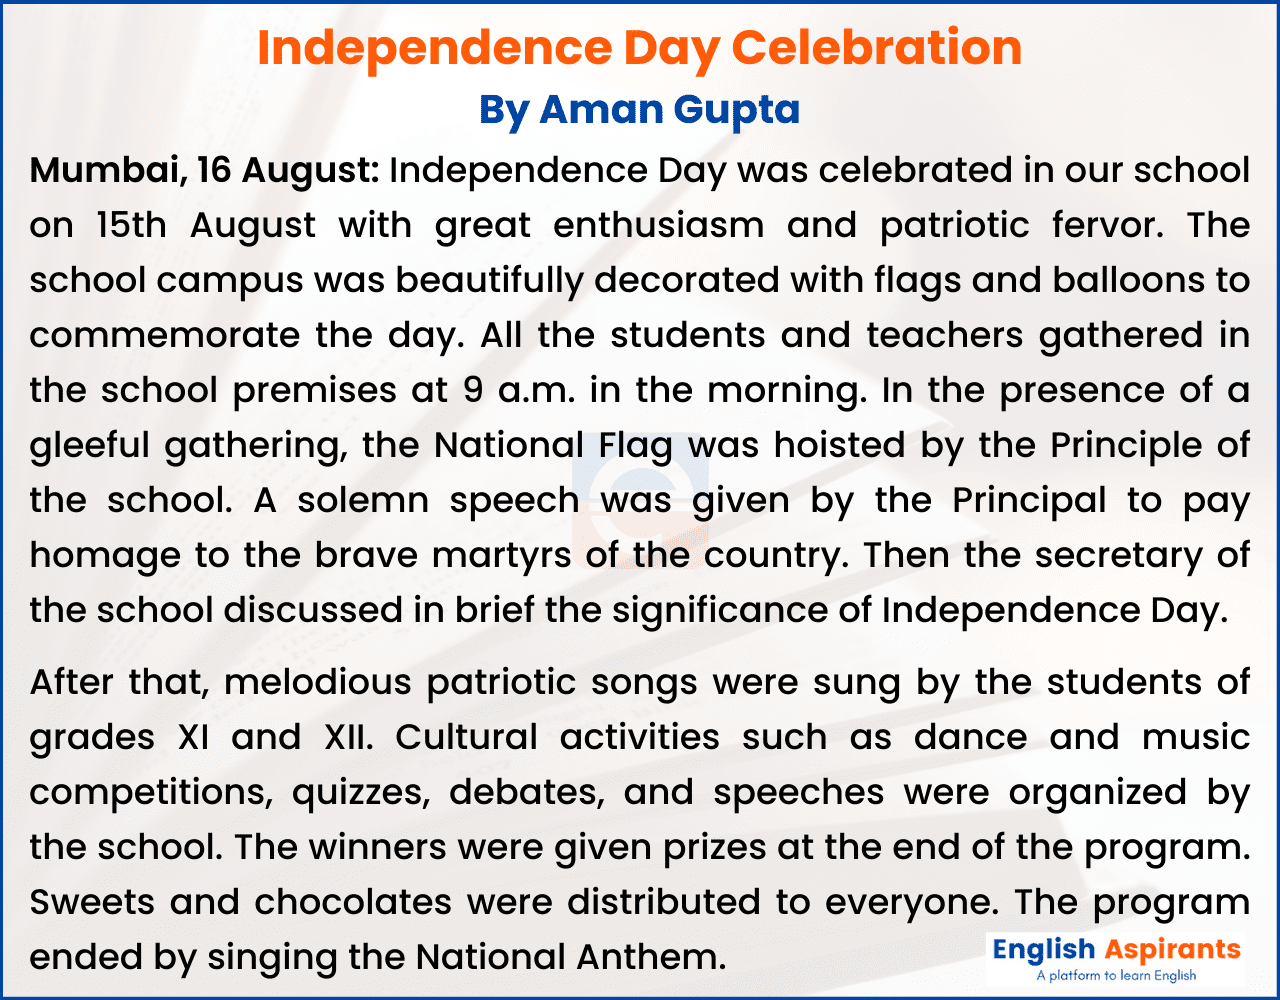 Report Writing on Independence Day Celebration